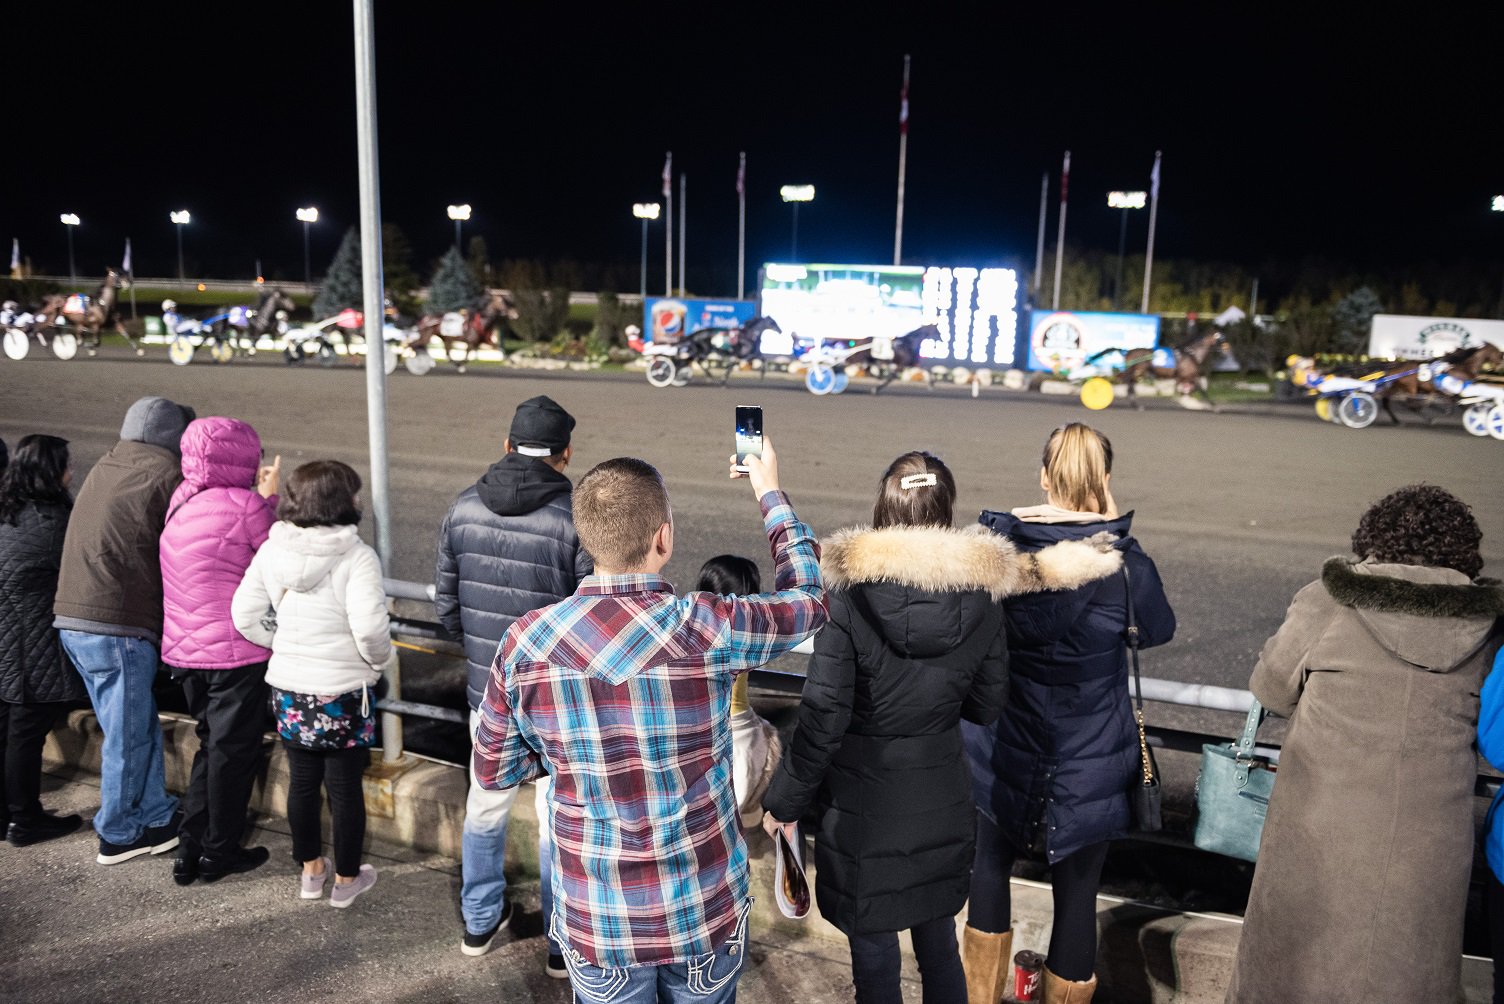 In Pictures: The 2019 Breeders Crown